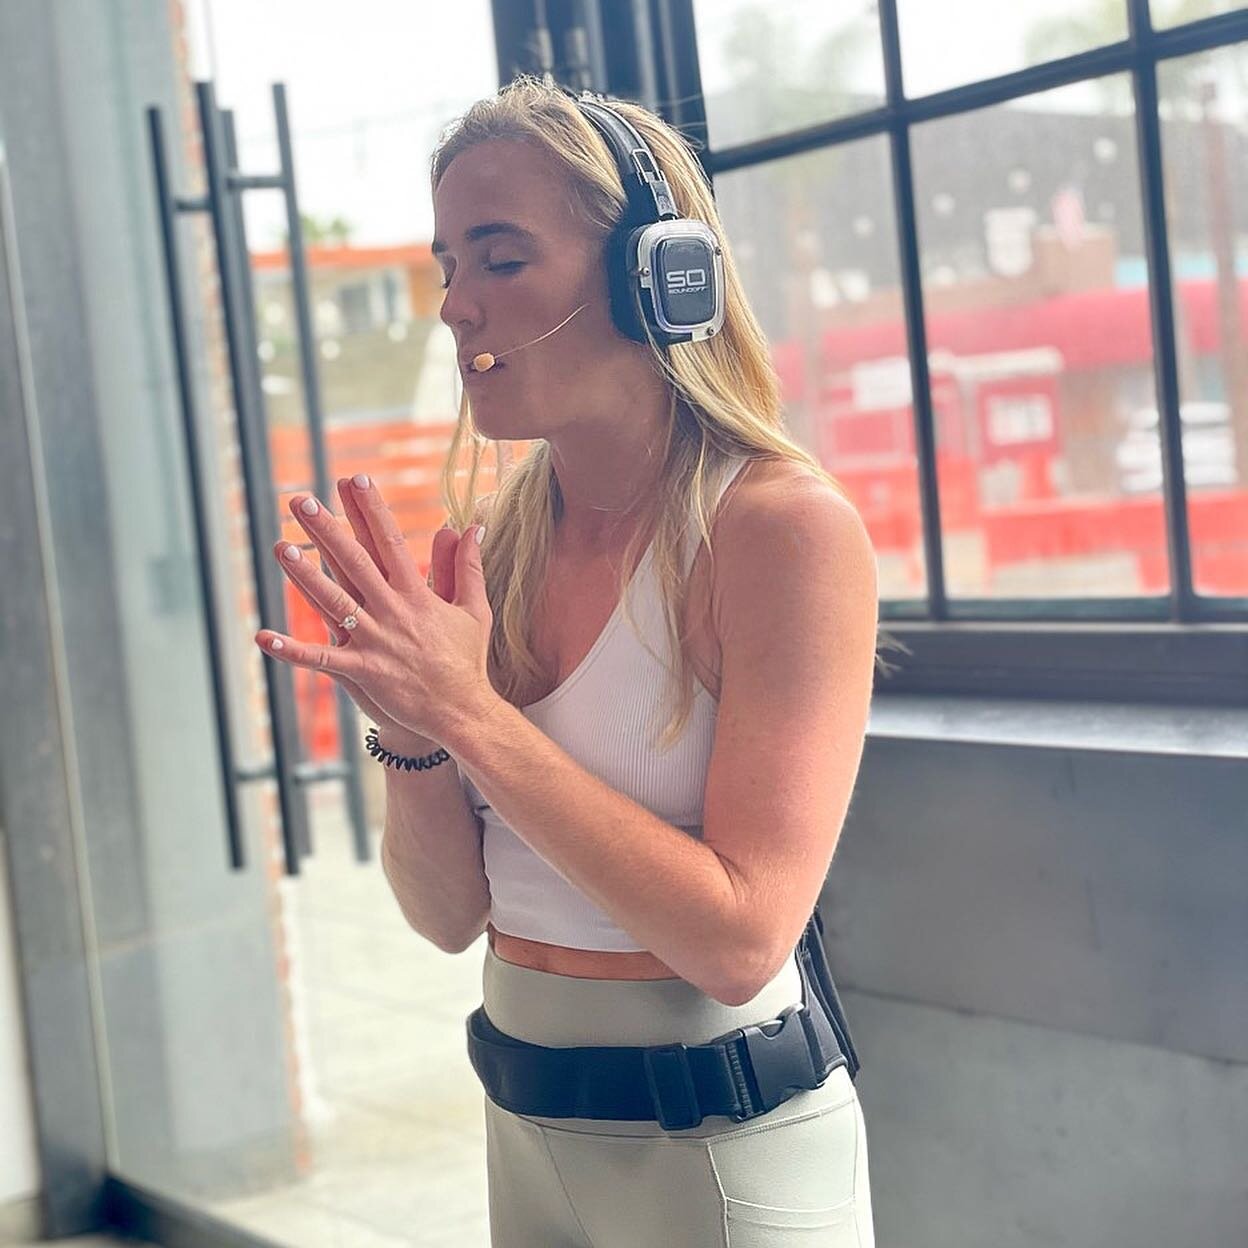 🎧☀️Summer Series: Silent Disco Movement in the Park ☀️🎧

Join us for outdoor *silent disco* Yoga + Come Alive classes every Wednesday at 6pm starting next week 6/30!

Paired with noise-isolating silent disco headphones, each class will guide you th